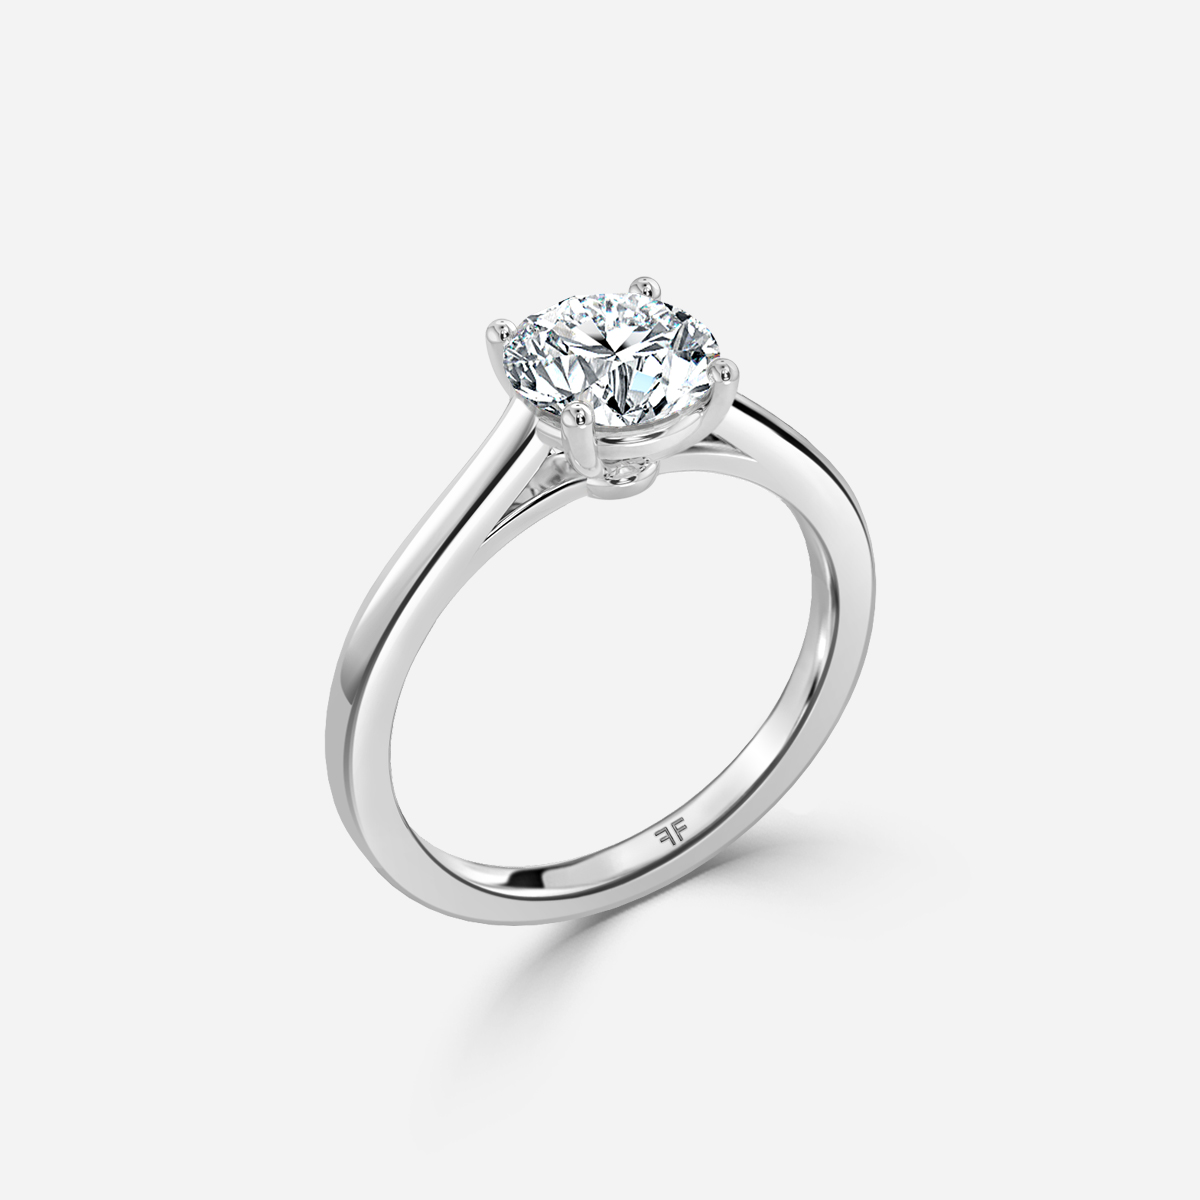 Sabene White Gold Solitaire Engagement Ring